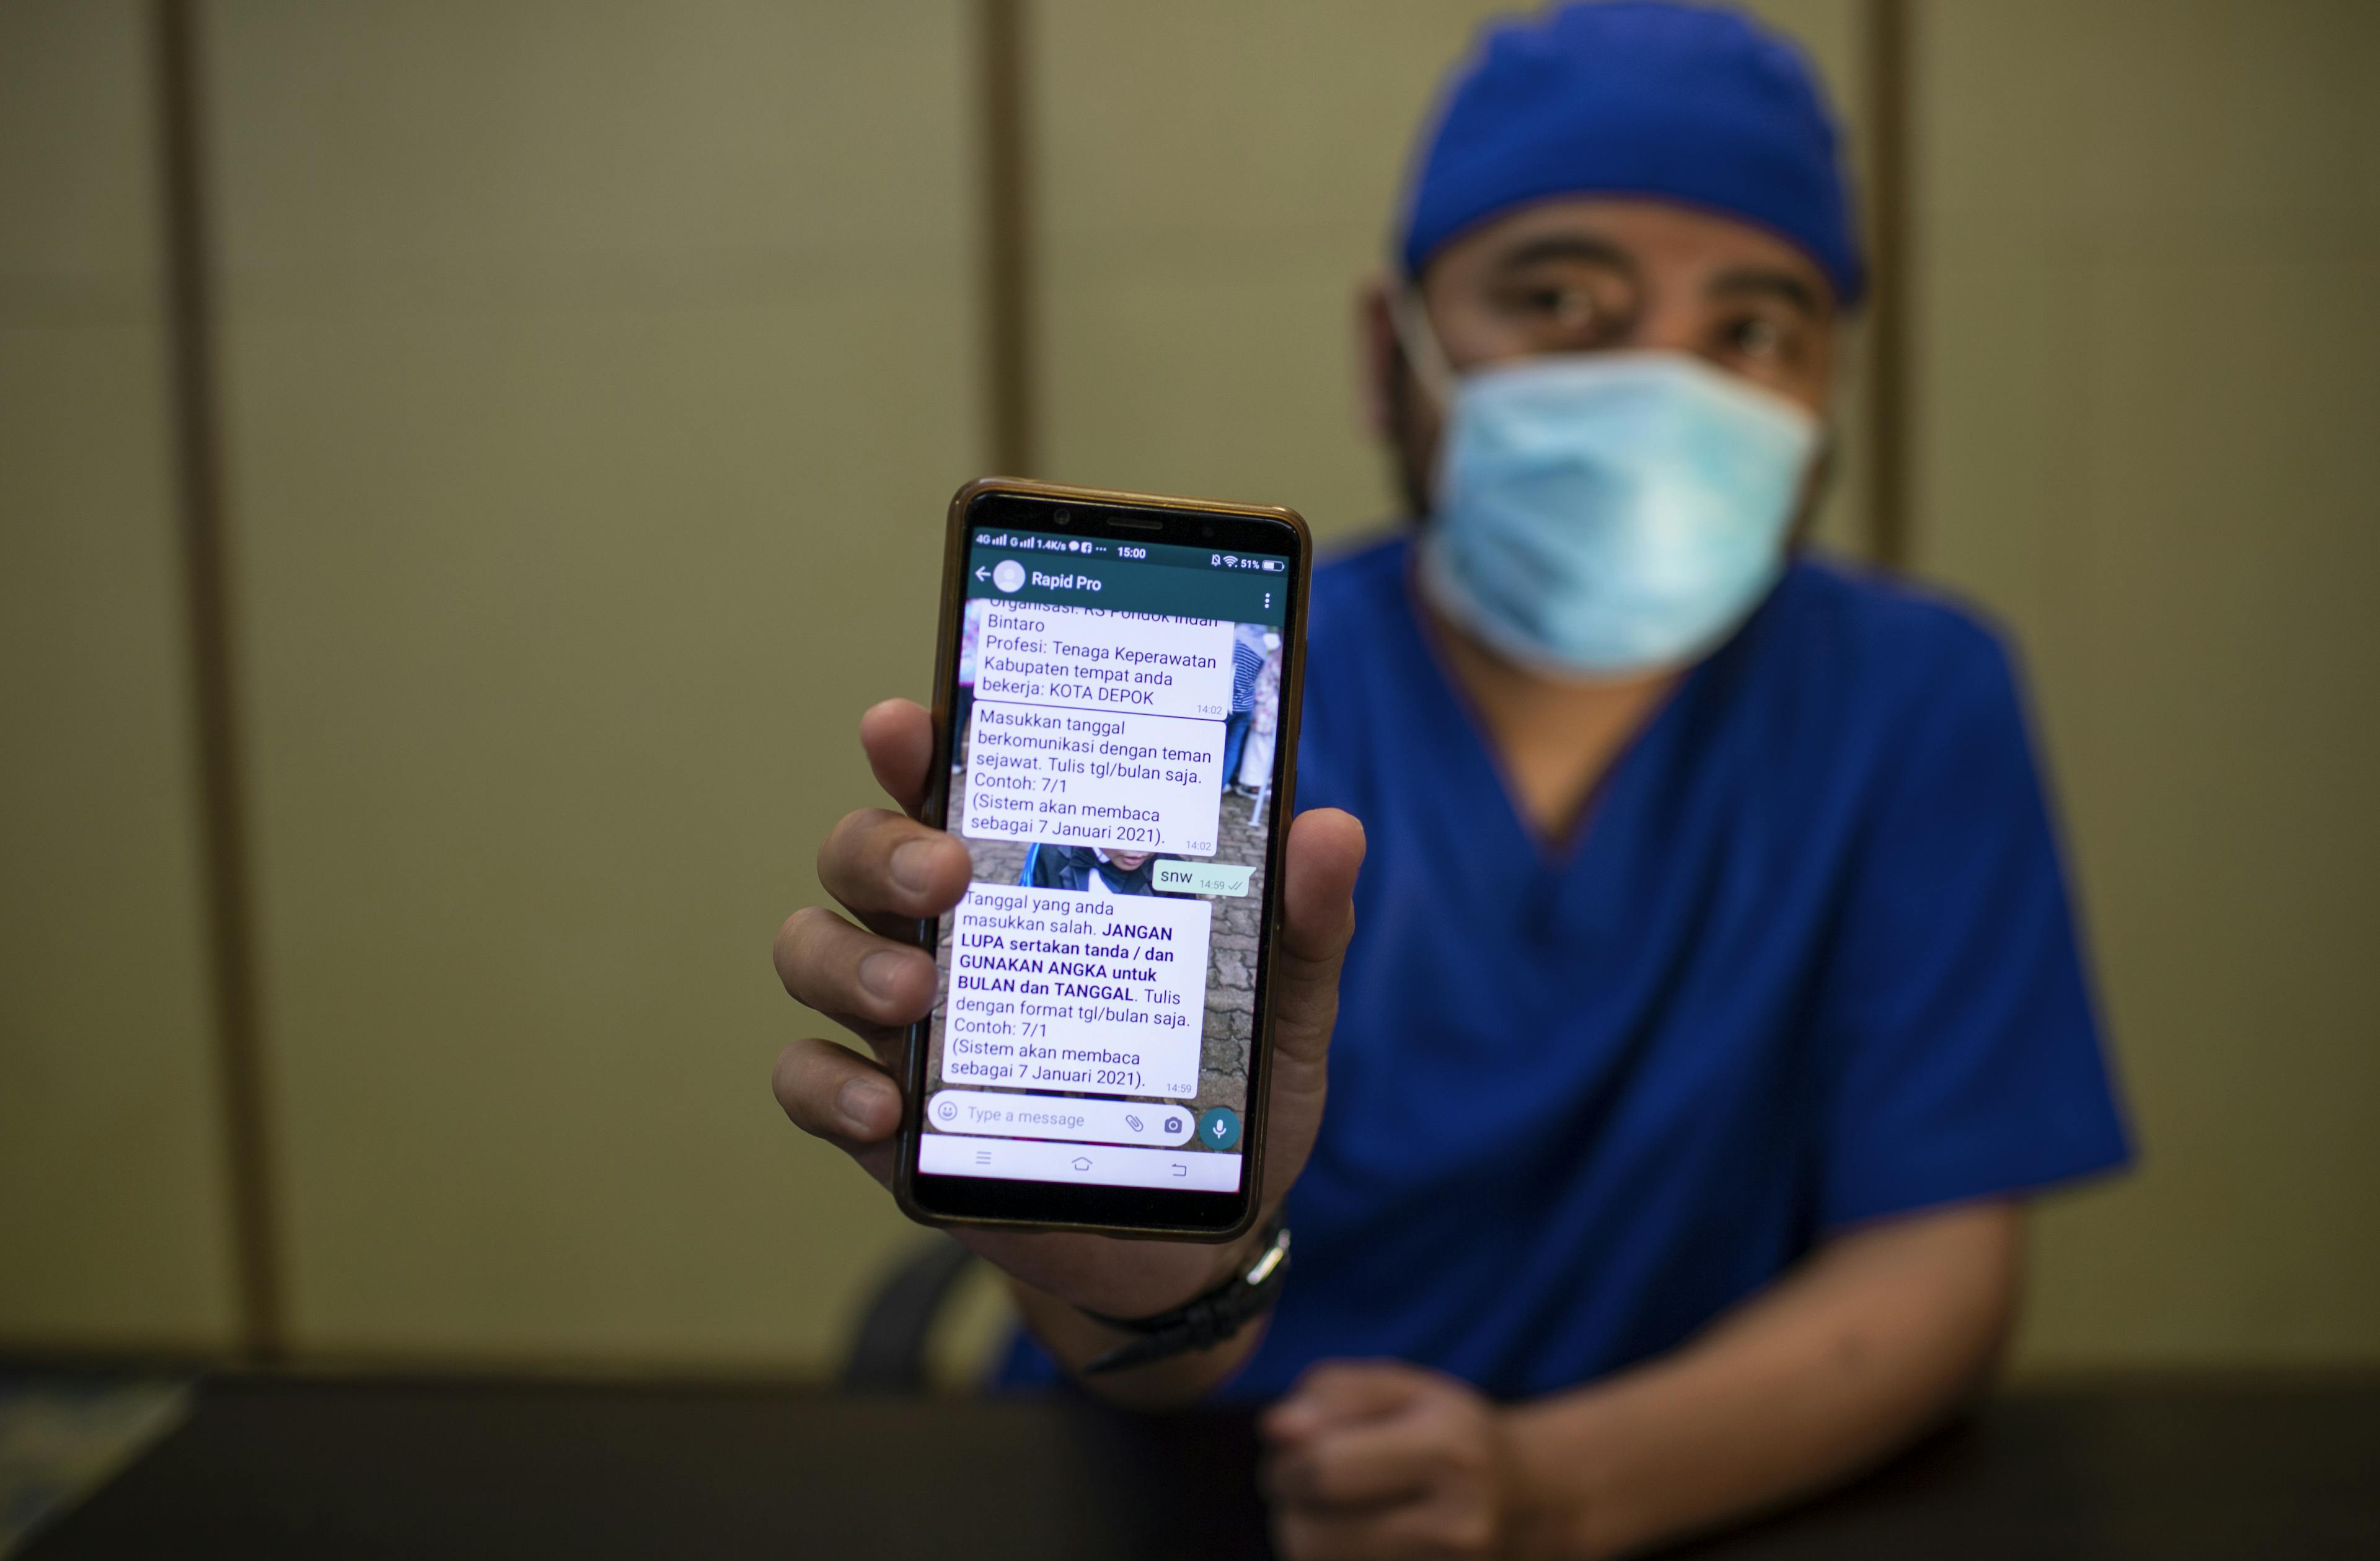 Stevanus Agus Rahardjo, an emergency room nurse, shows the RapidPro application on his smartphone while attending an online training at Pondok Indah Bintaro Hospital in South Tangerang, Indonesia, on 18 February 2021. 